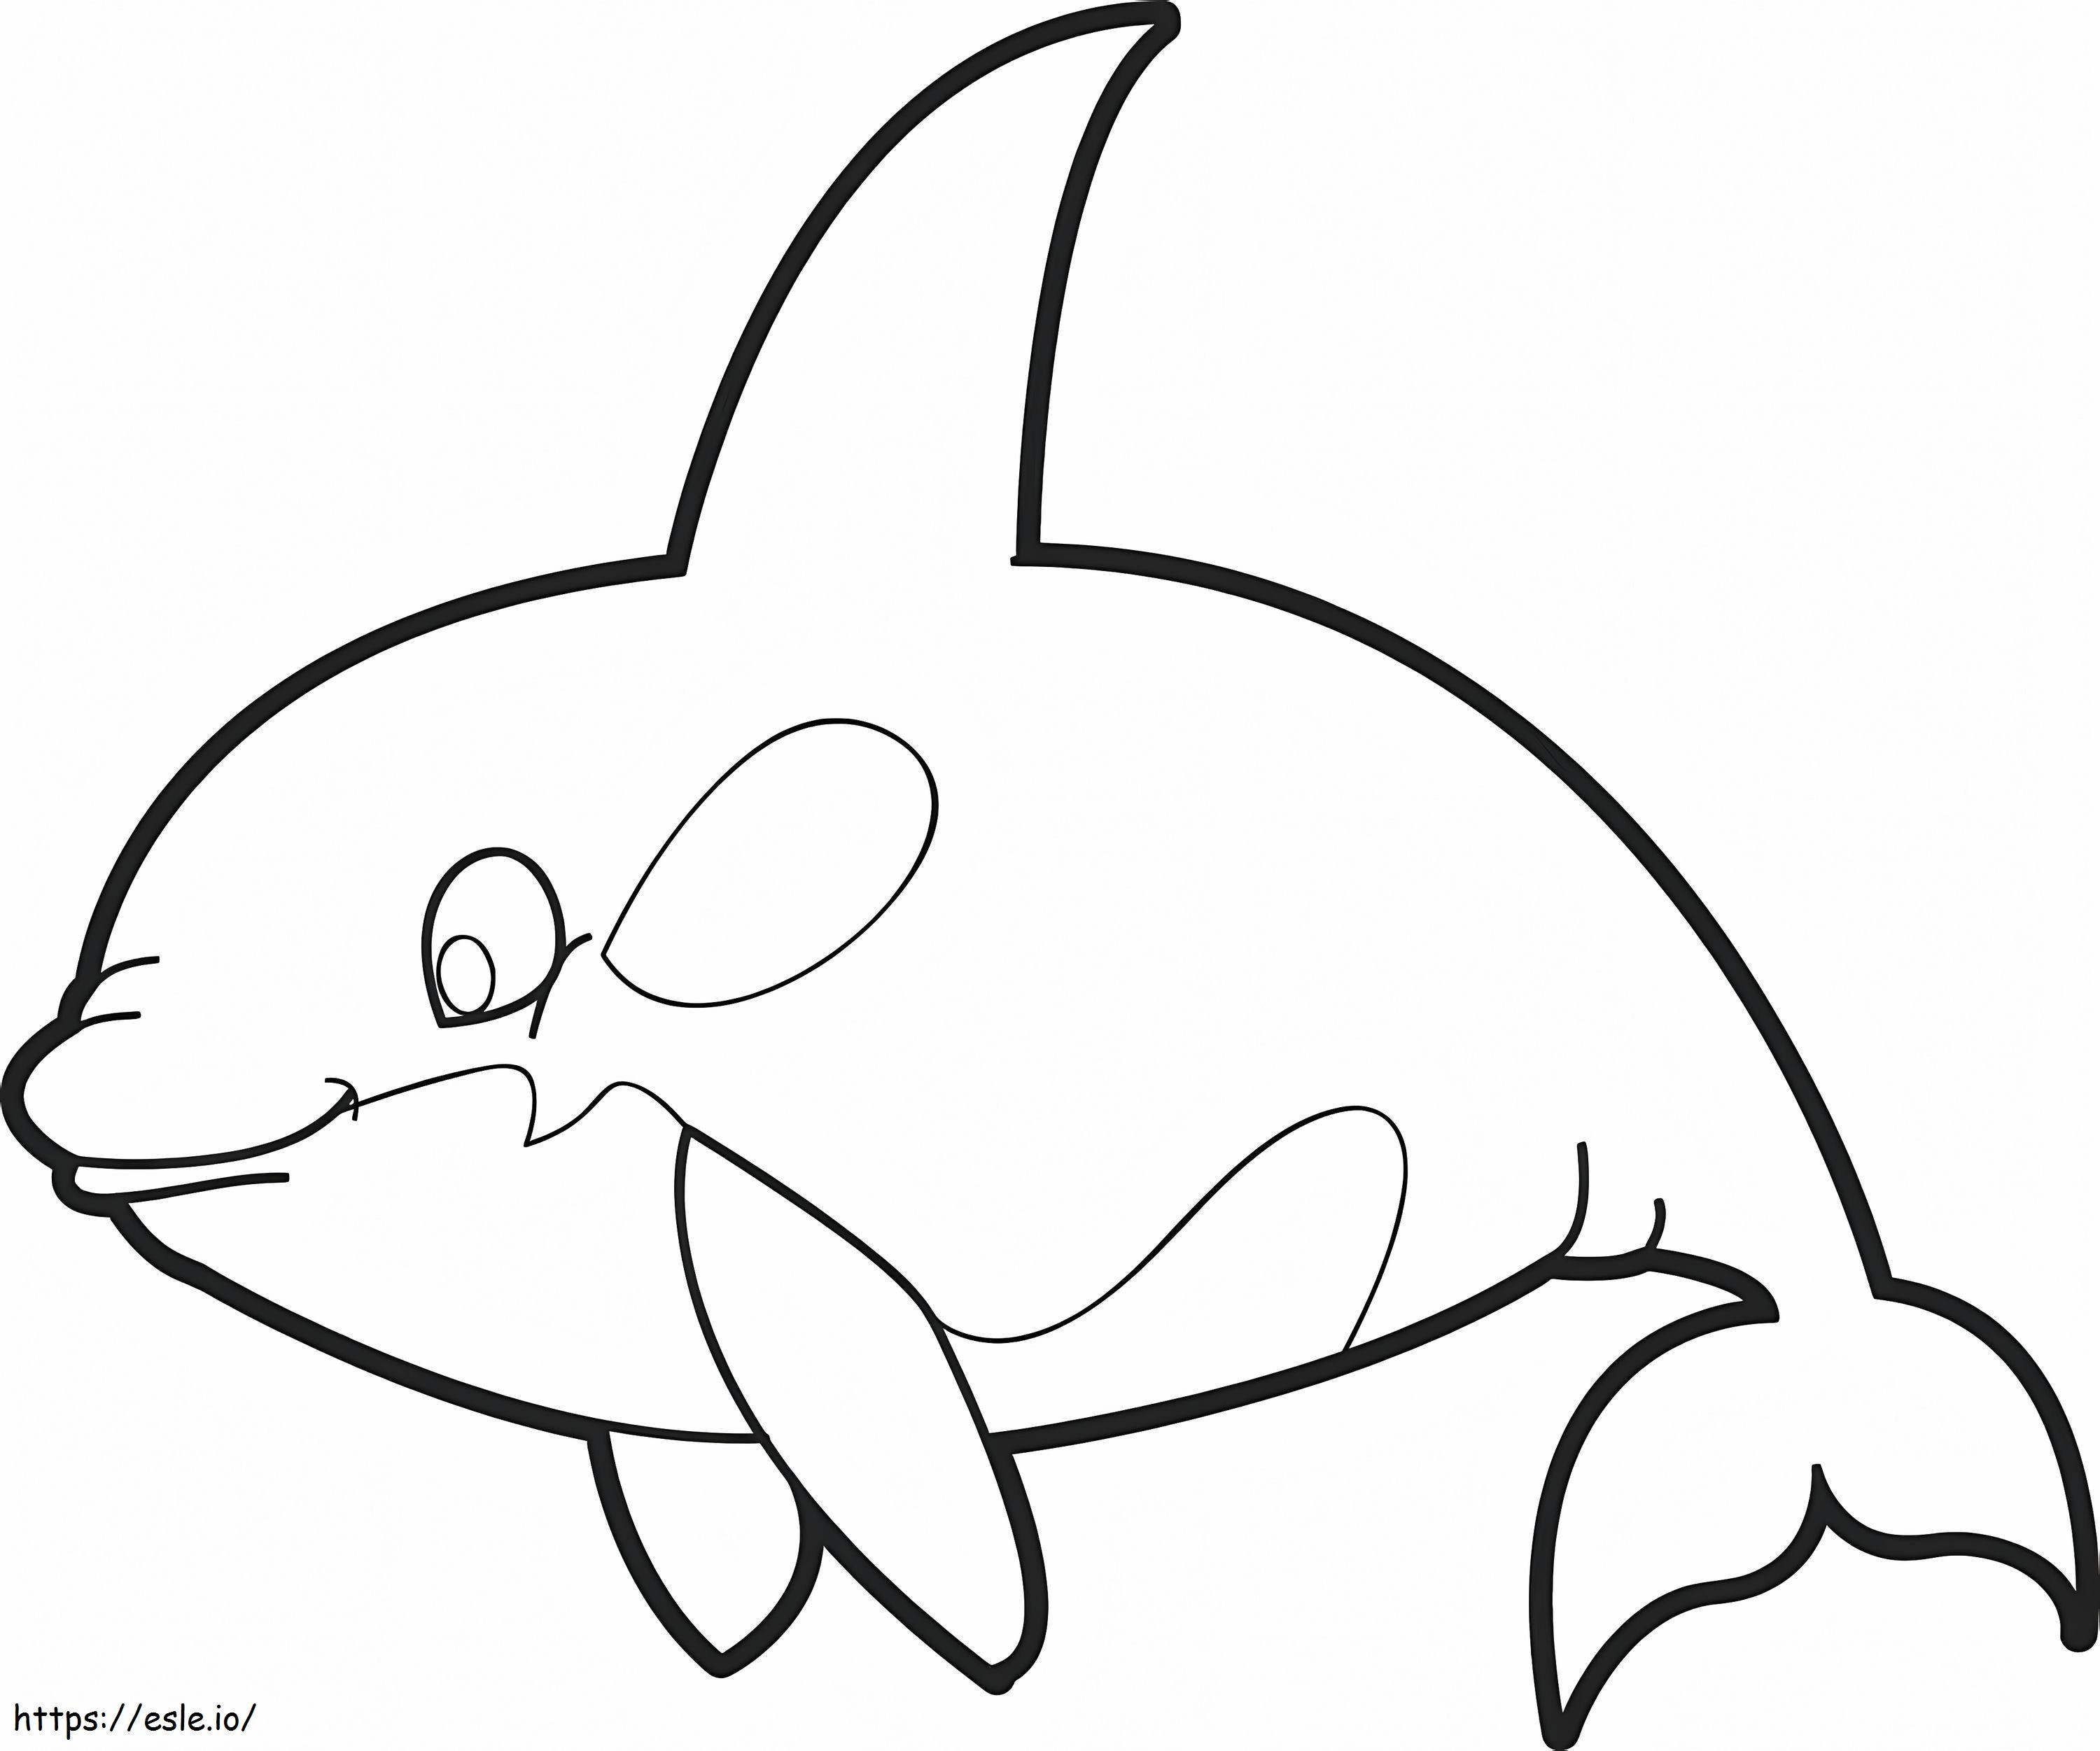 Good Whale coloring page